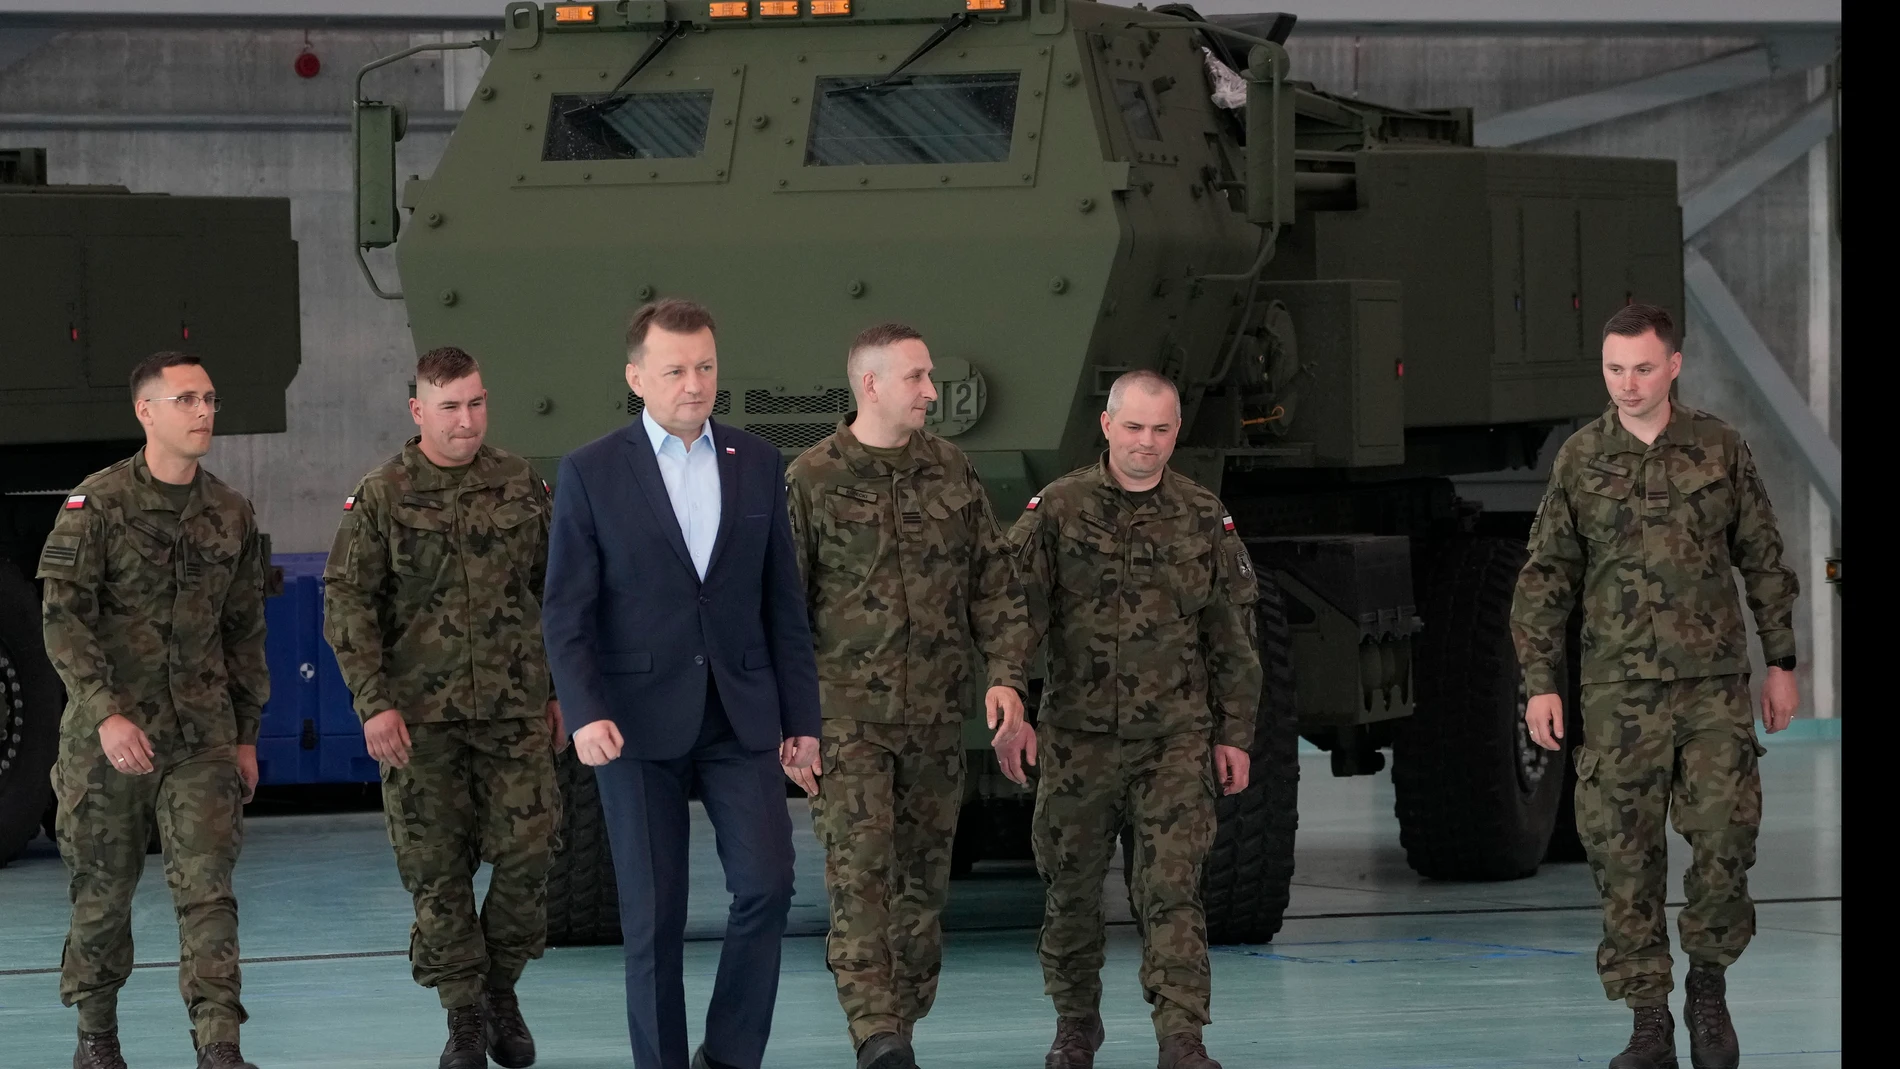 Poland's Defense Minister Mariusz Blaszczak, center, walks during ceremony after receiving its first shipment of U.S.-made HIMARS rocket launchers, at an air base in Warsaw, Poland, on Monday, 15 May 2023. Poland has received its first shipment of U.S.-made HIMARS rocket launchers, part of an upgrade of its defenses amid security concerns due to the war in neighboring Ukraine. (AP Photo/Czarek Sokolowski)